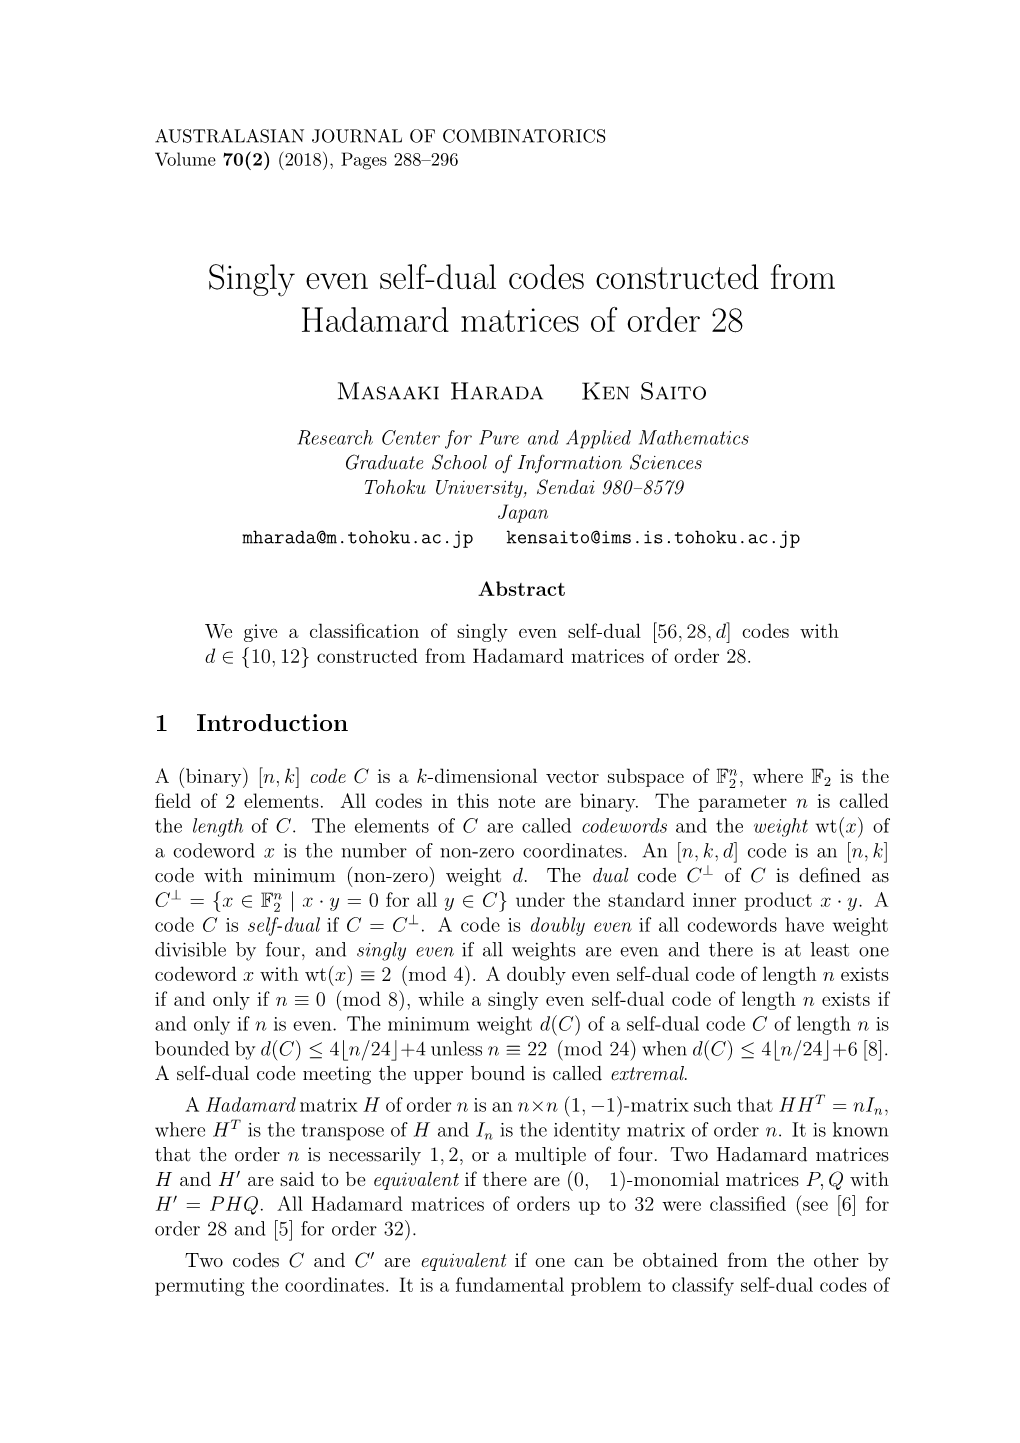 Singly Even Self-Dual Codes Constructed from Hadamard Matrices of Order 28